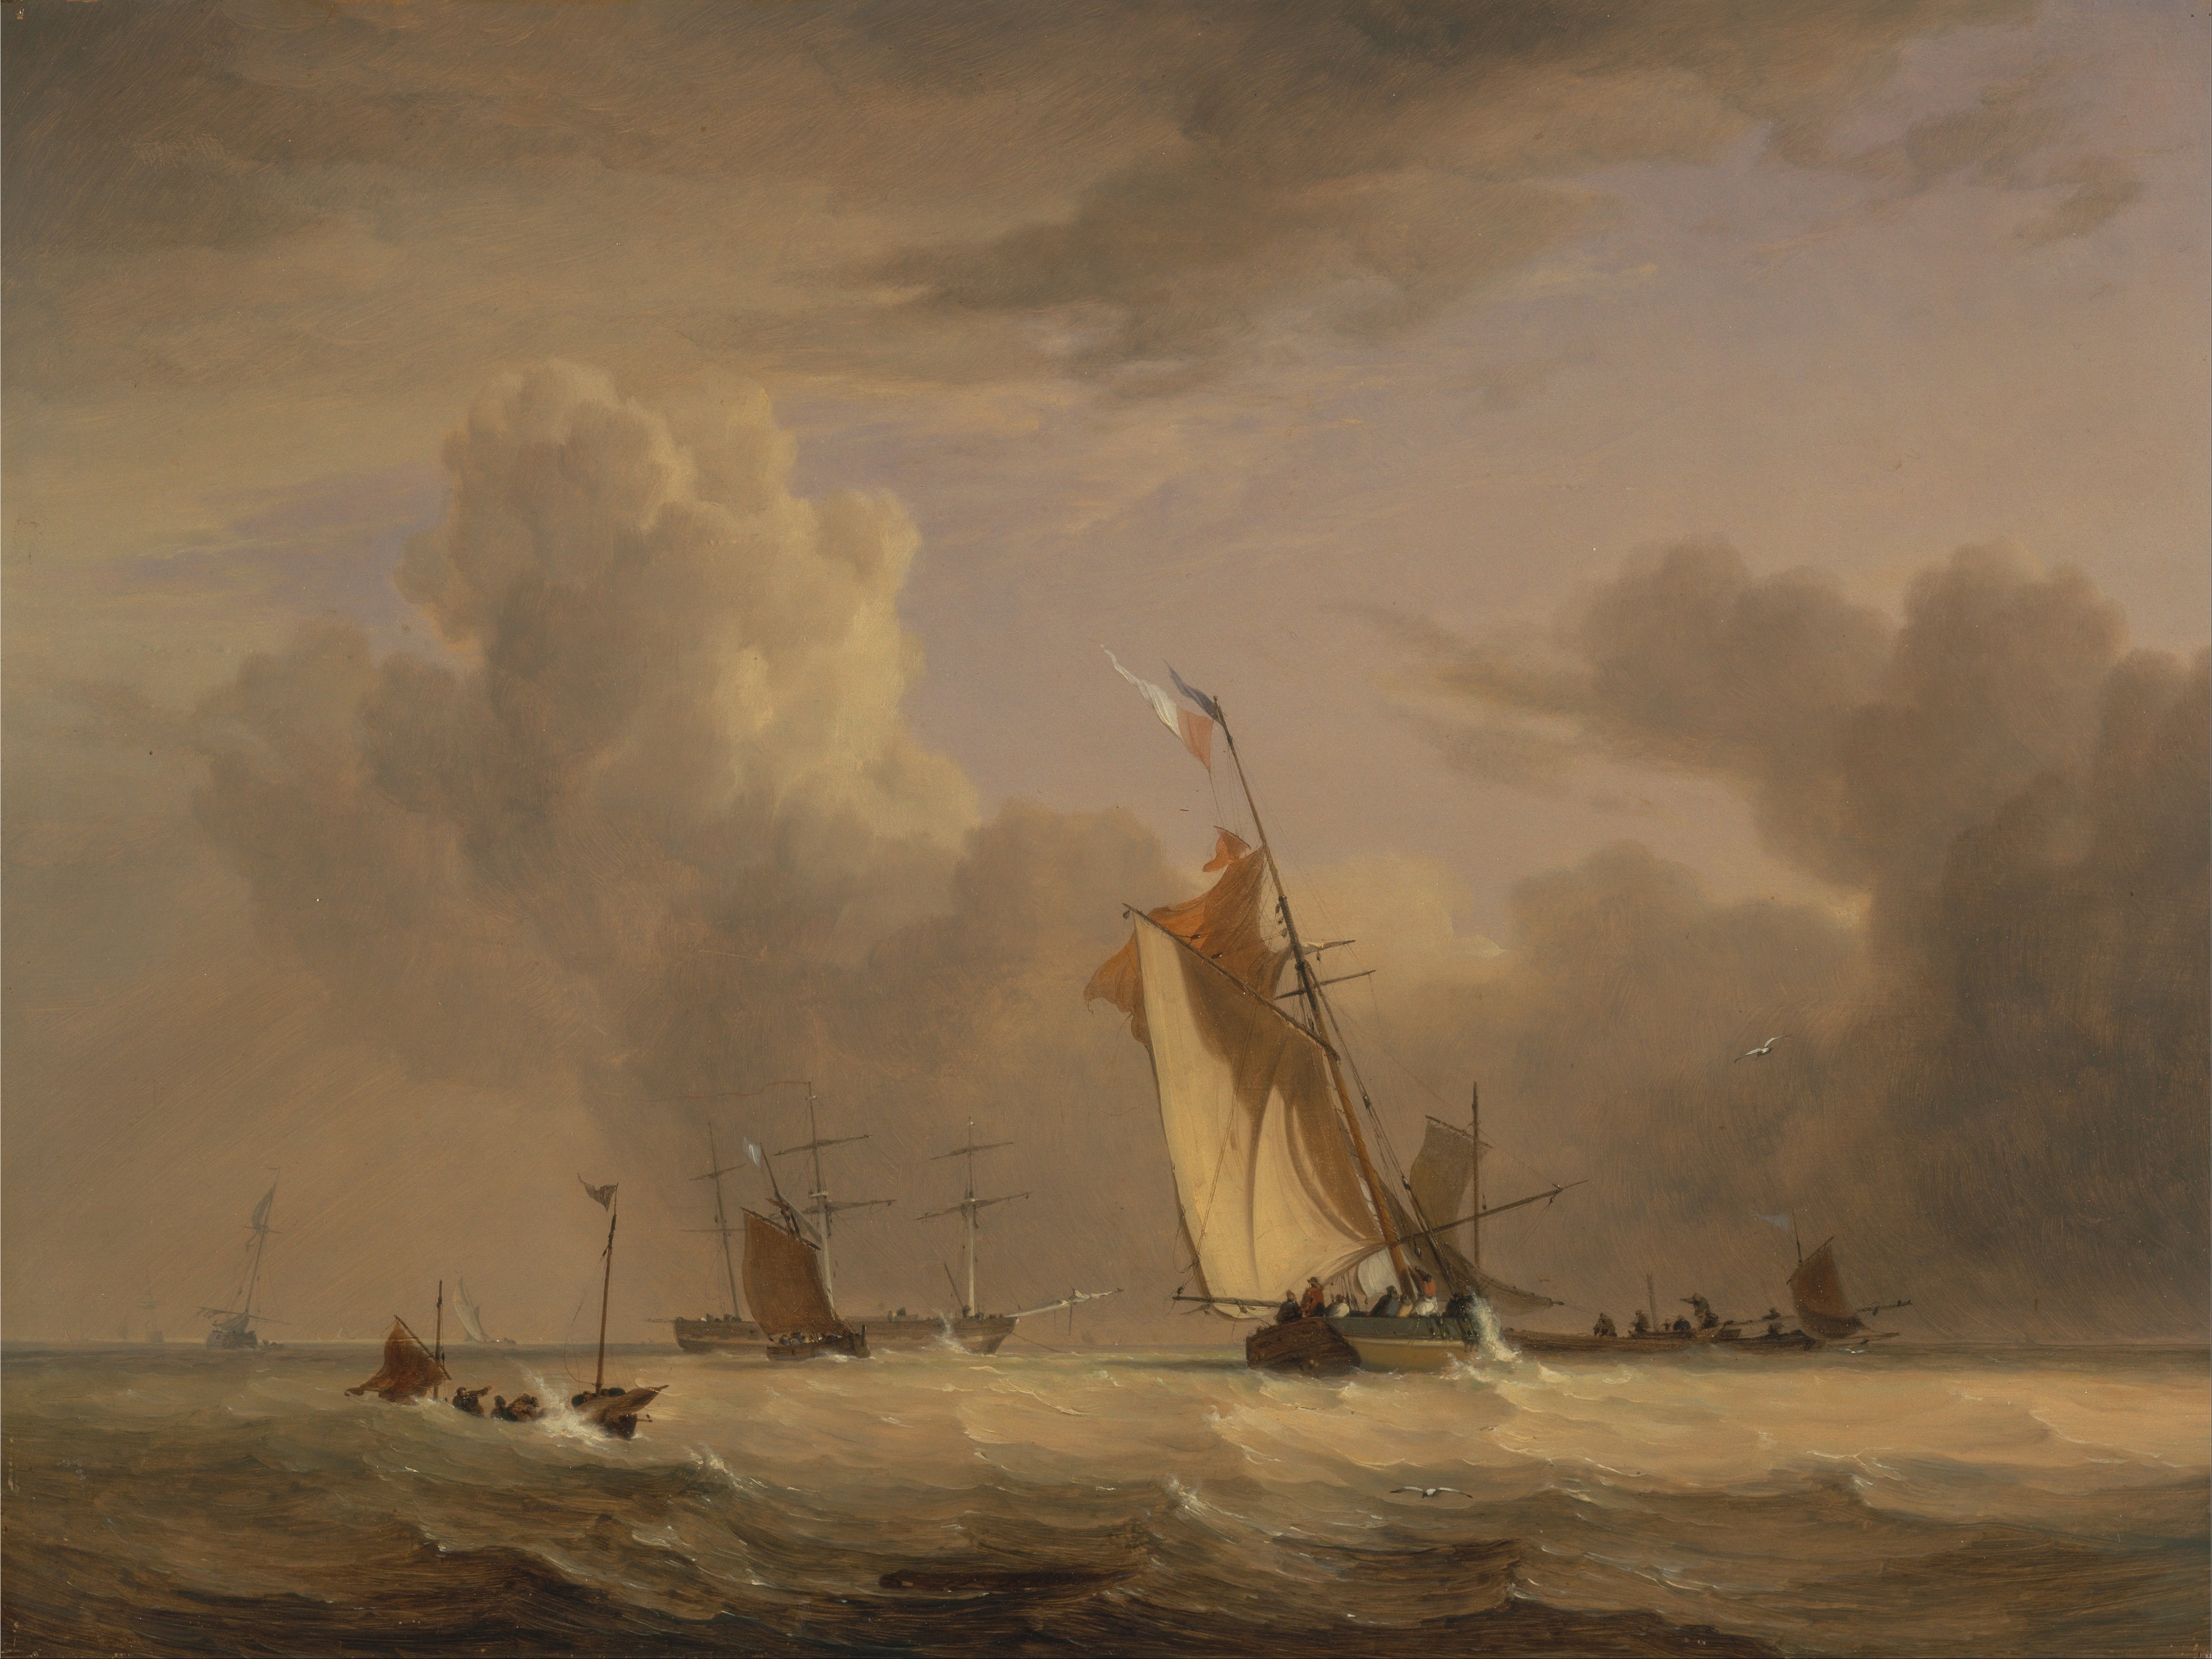 Joseph Stannard - Fishing Smack and Other Vessels in a Strong Breeze - Google Art Project